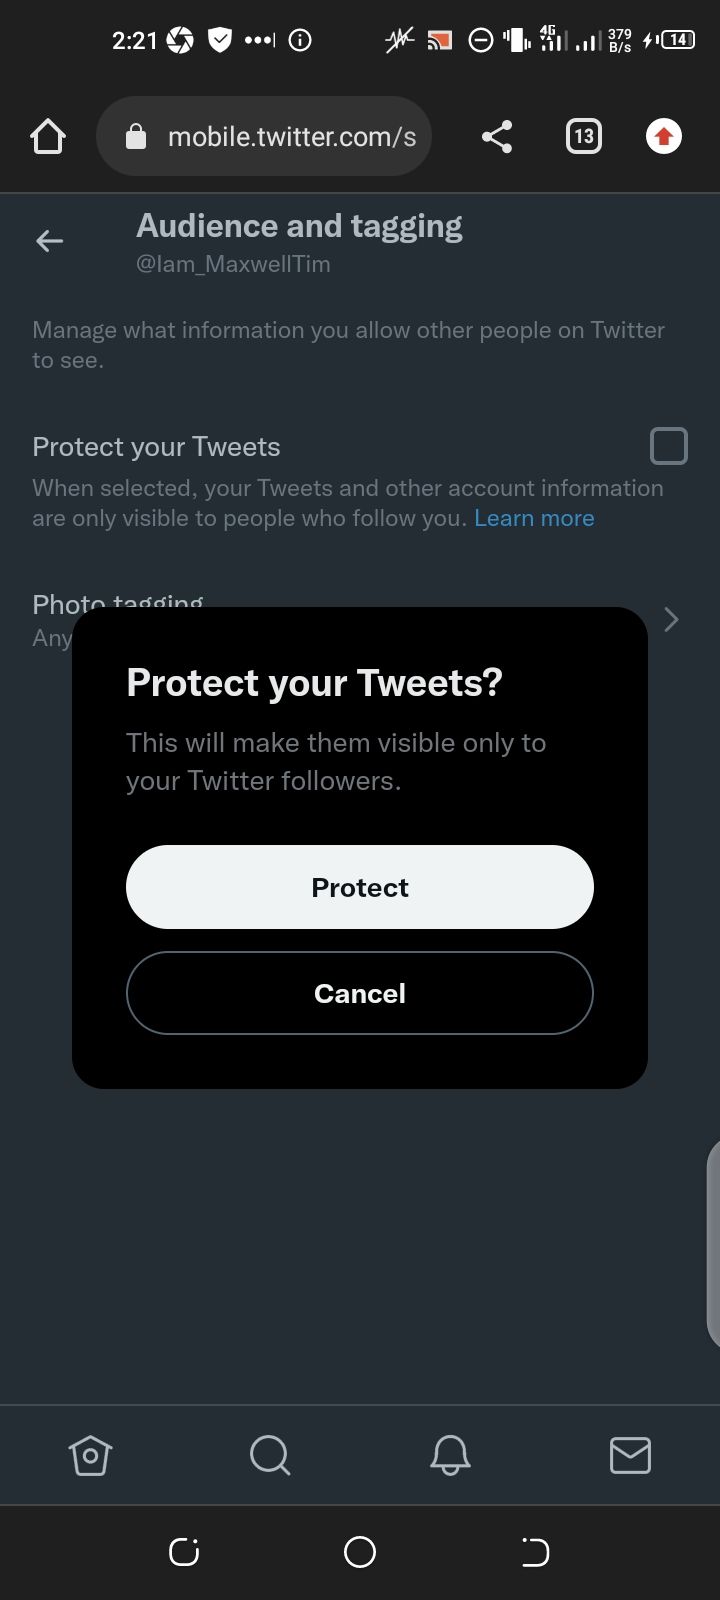 Protecting your tweets on Twitter 